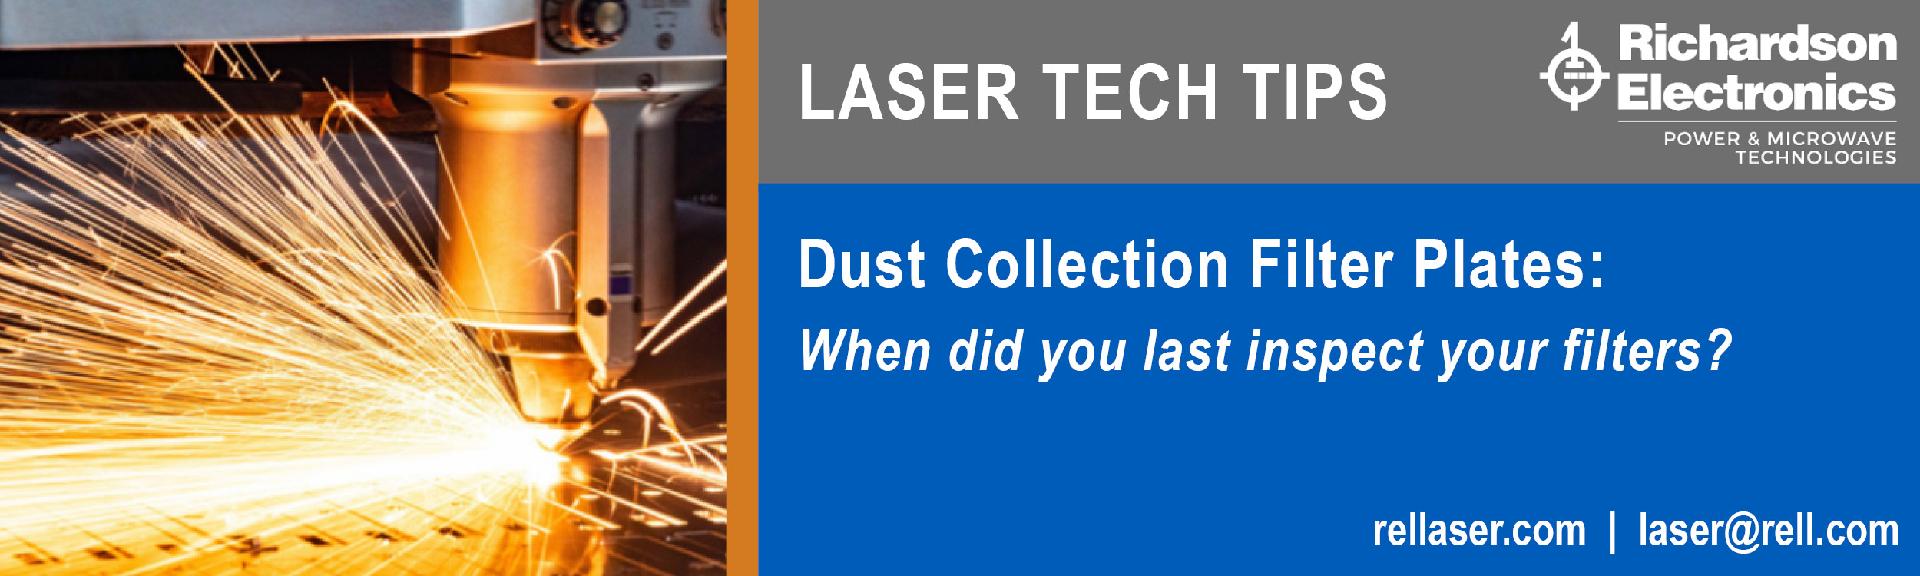 Laser Tech Tips - Dust Collection Filter Plates